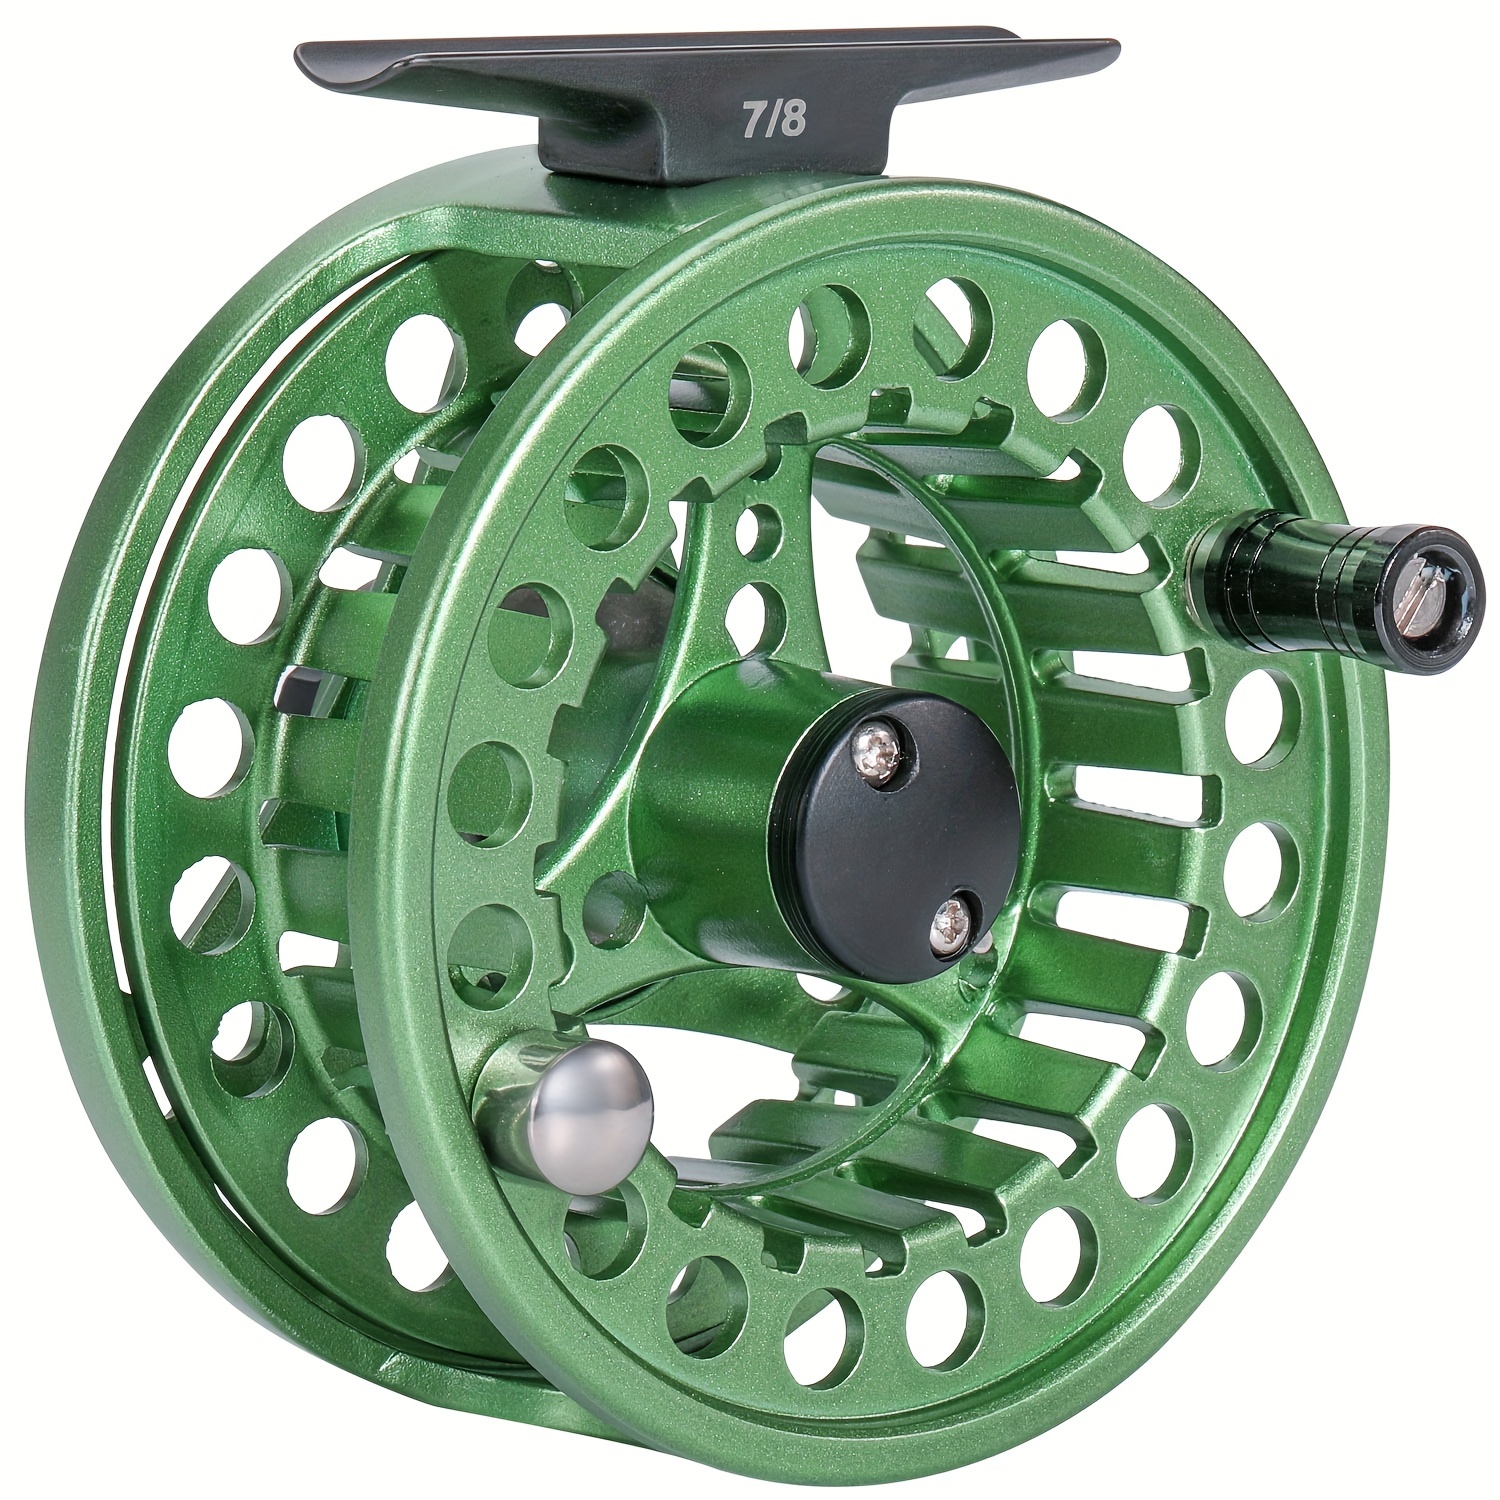 RISE Fly Fishing Reel 7/8